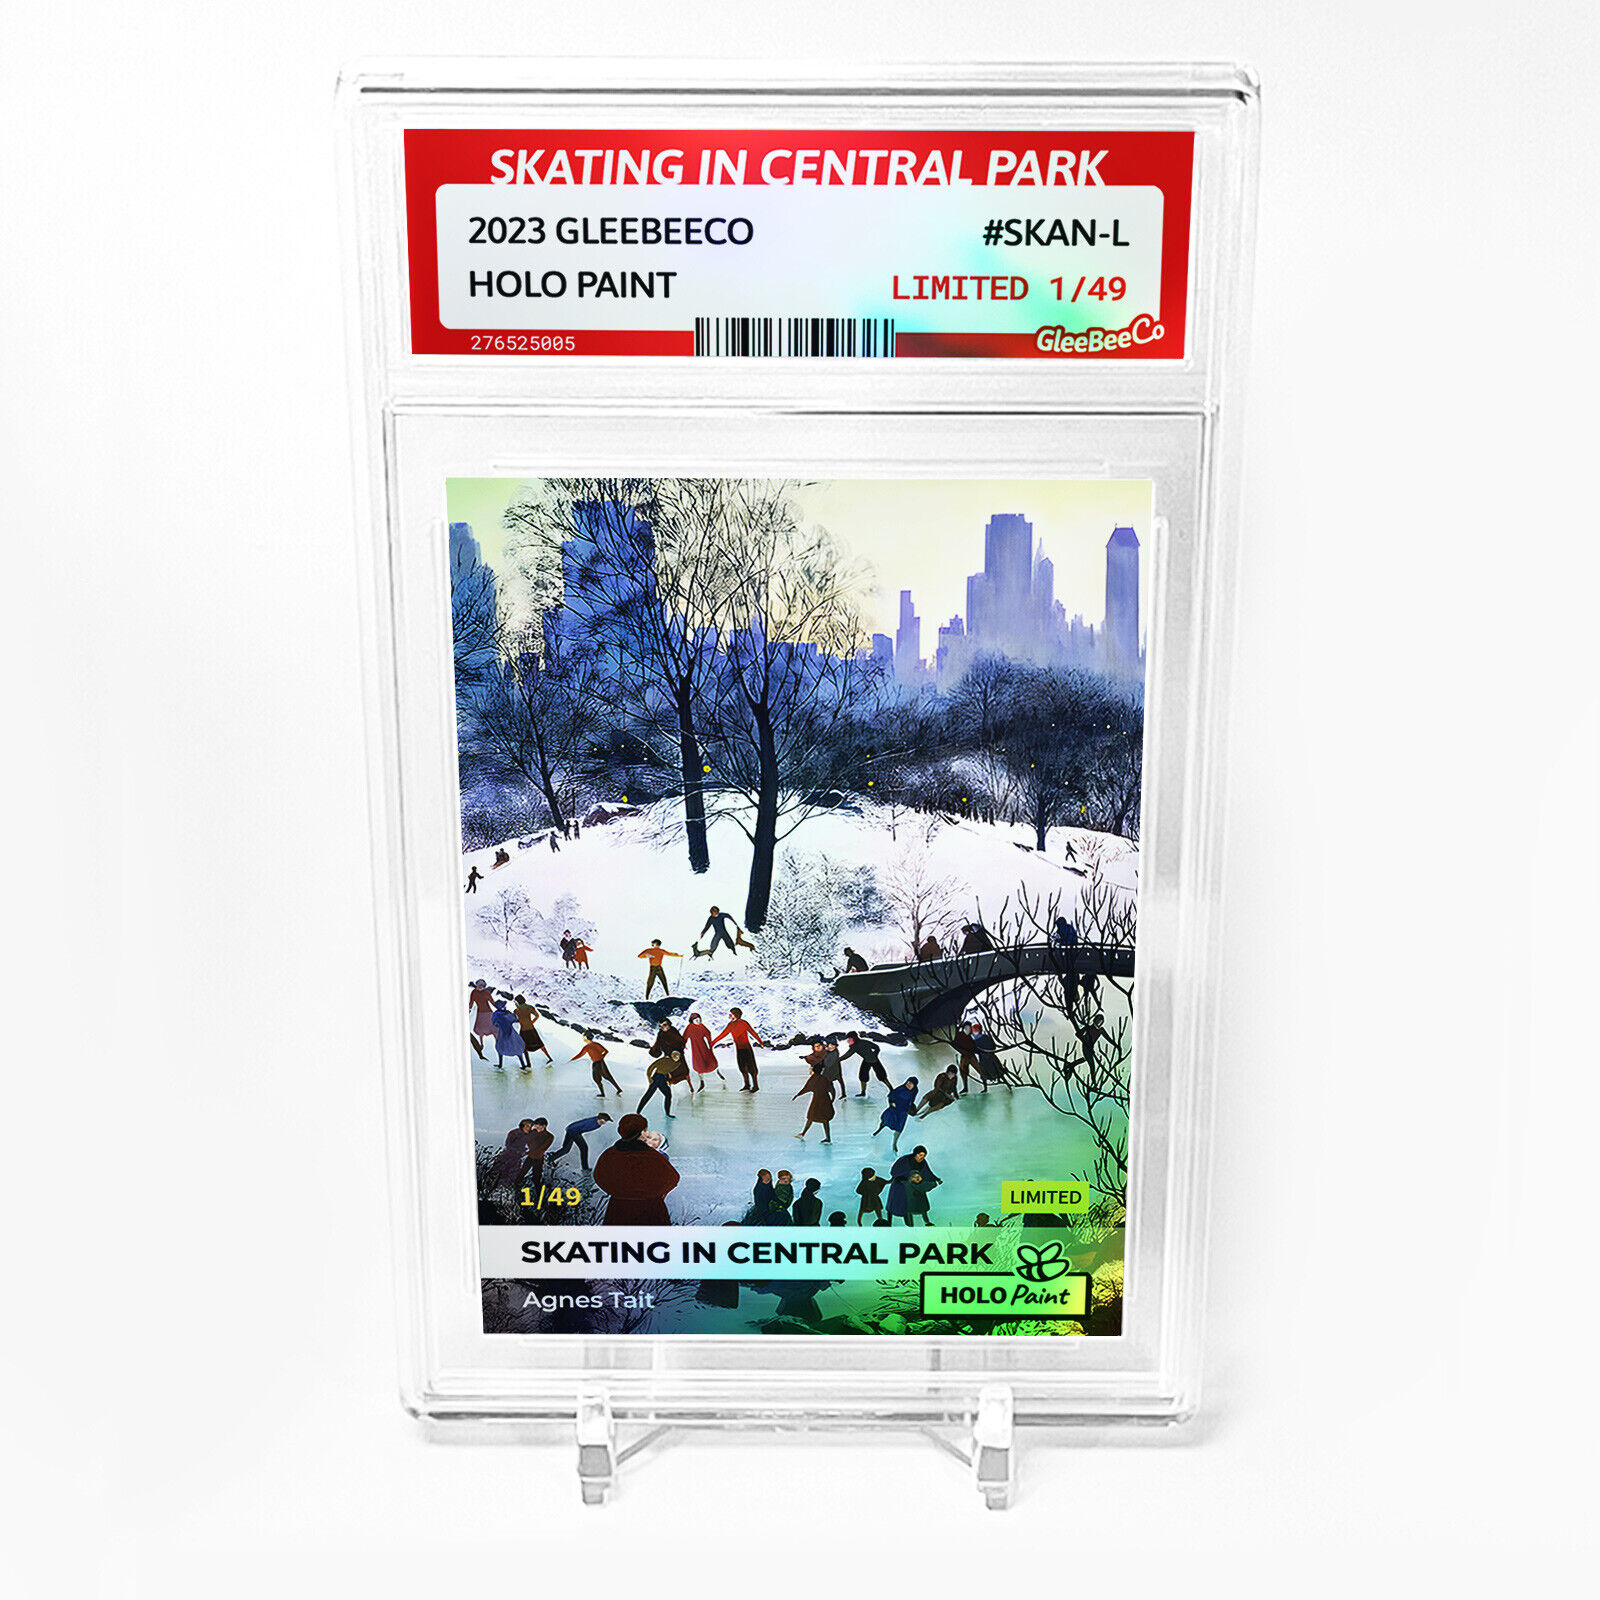 SKATING IN CENTRAL PARK Card 2023 GleeBeeCo Holo Paint #SKAN-L /49 Made